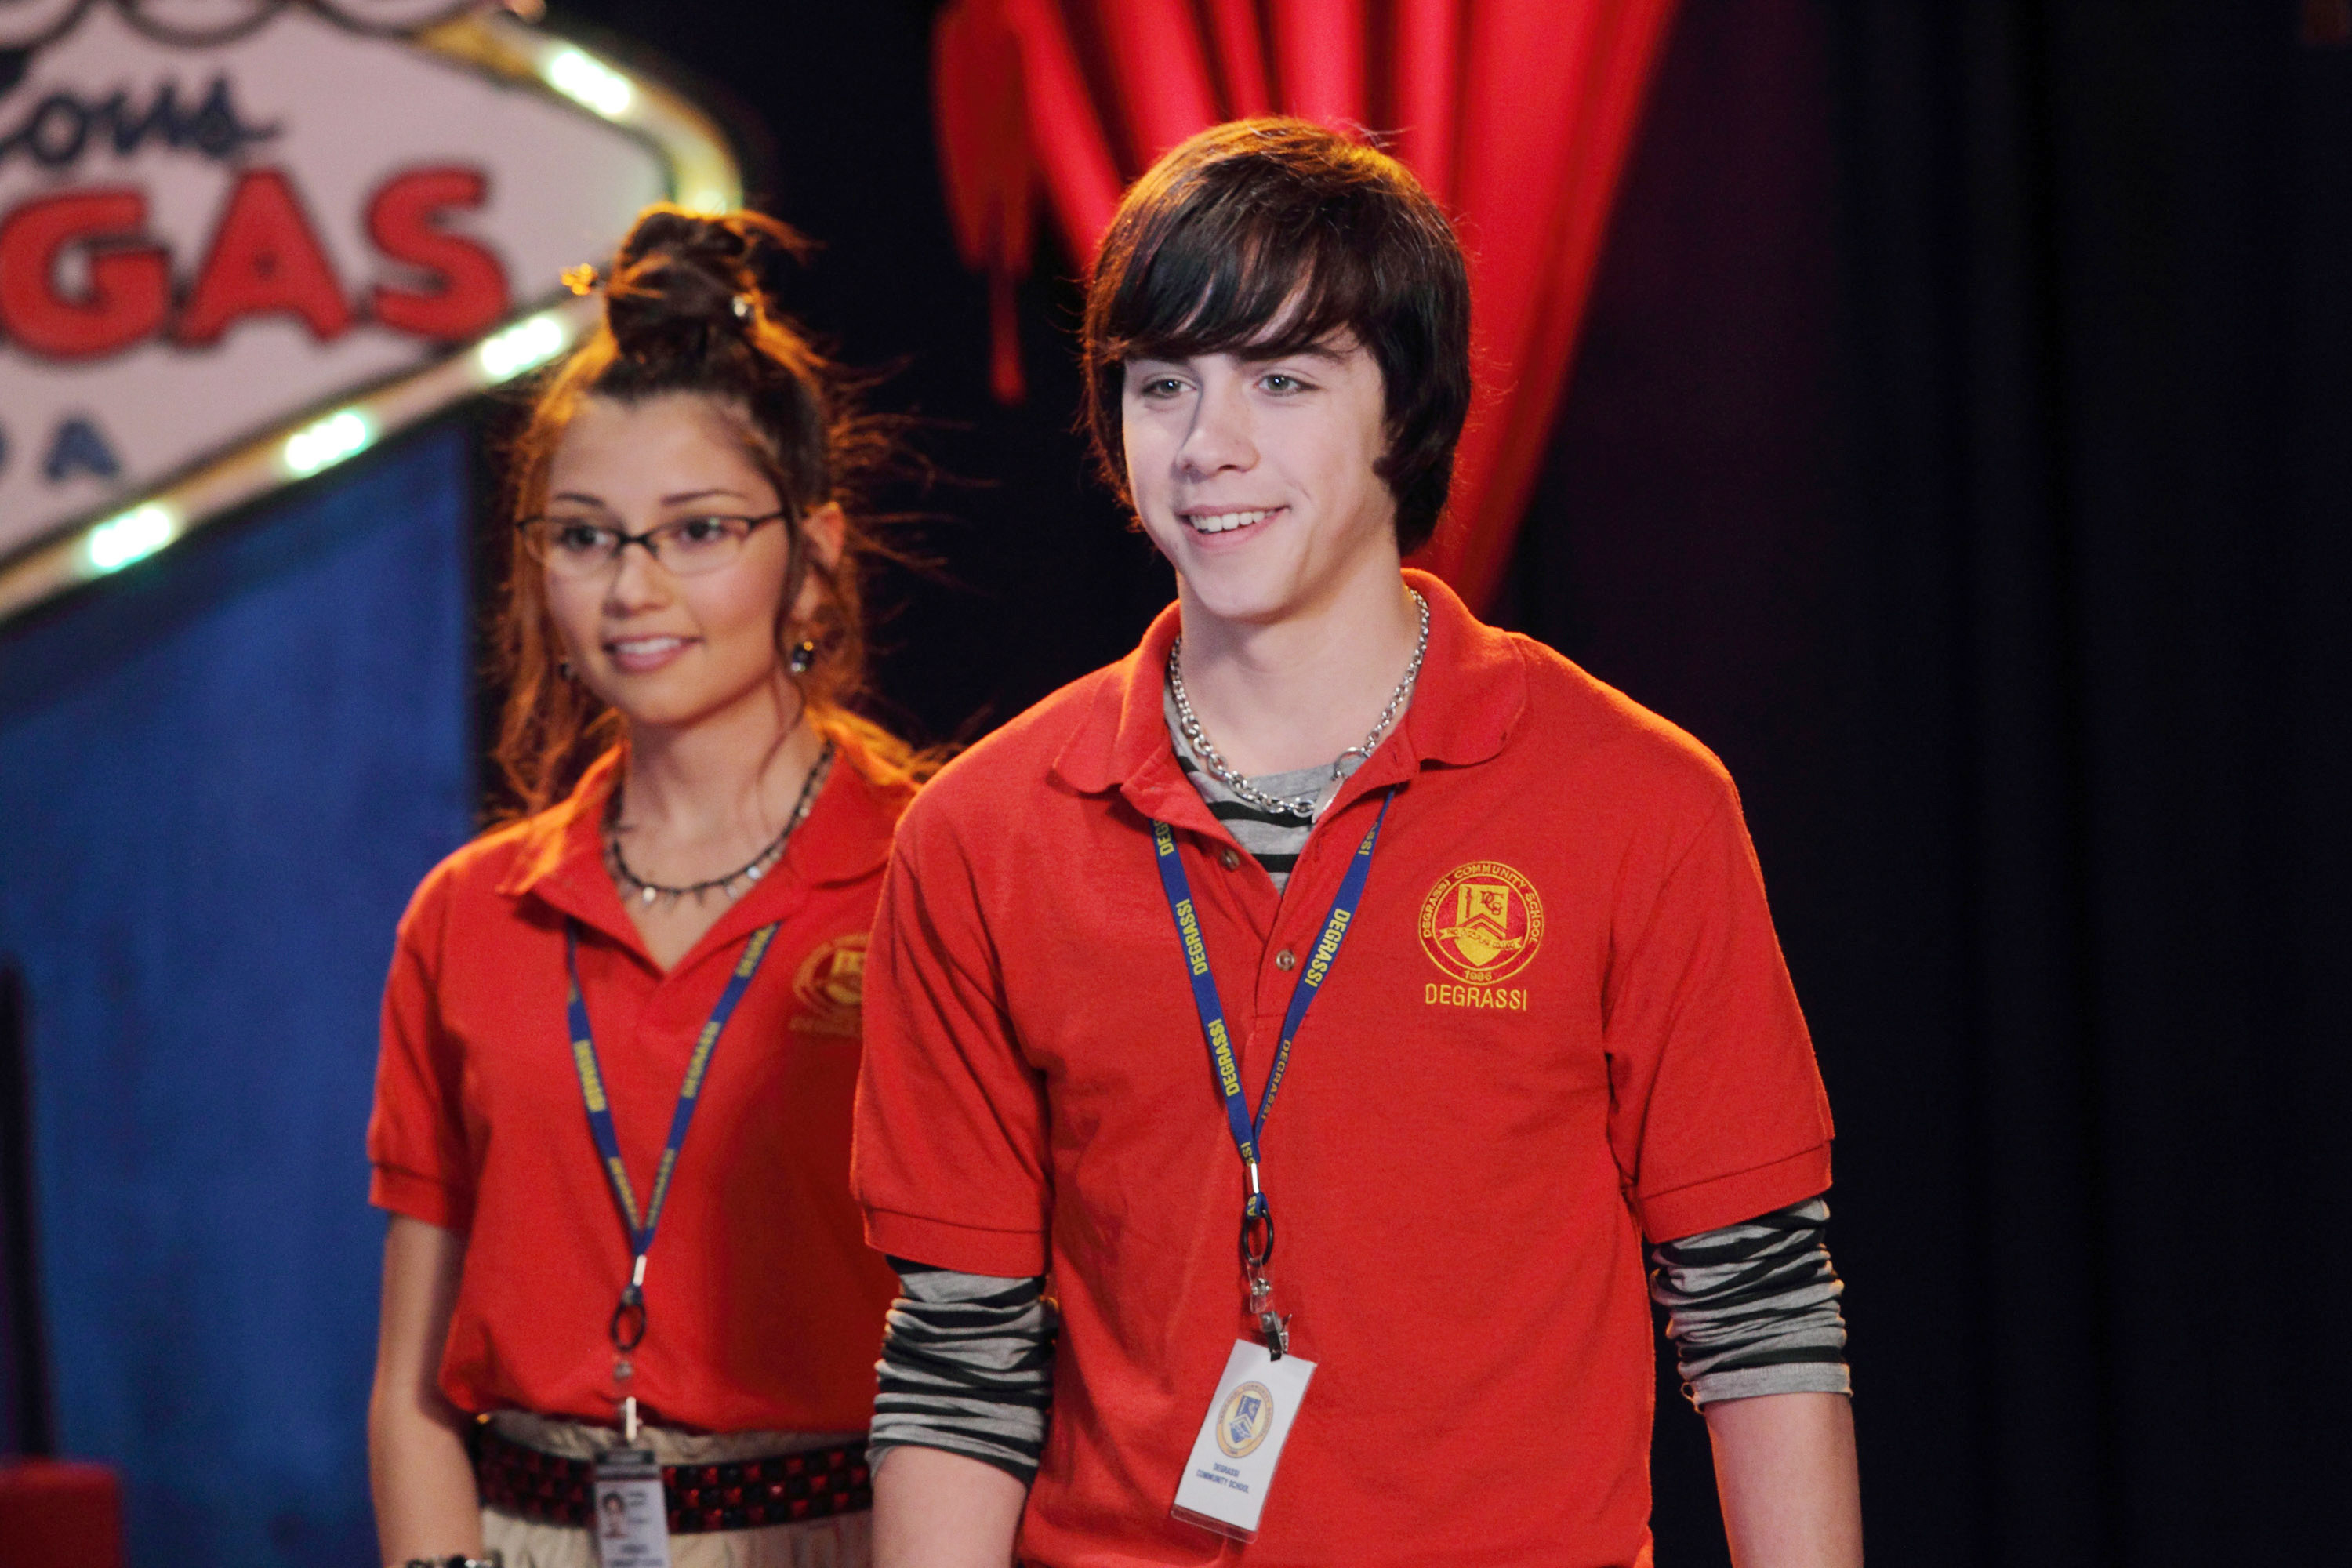 Still from &quot;Degrassi: The Next Generation&quot; featuring Cristine Prosperi and Munro Chambers